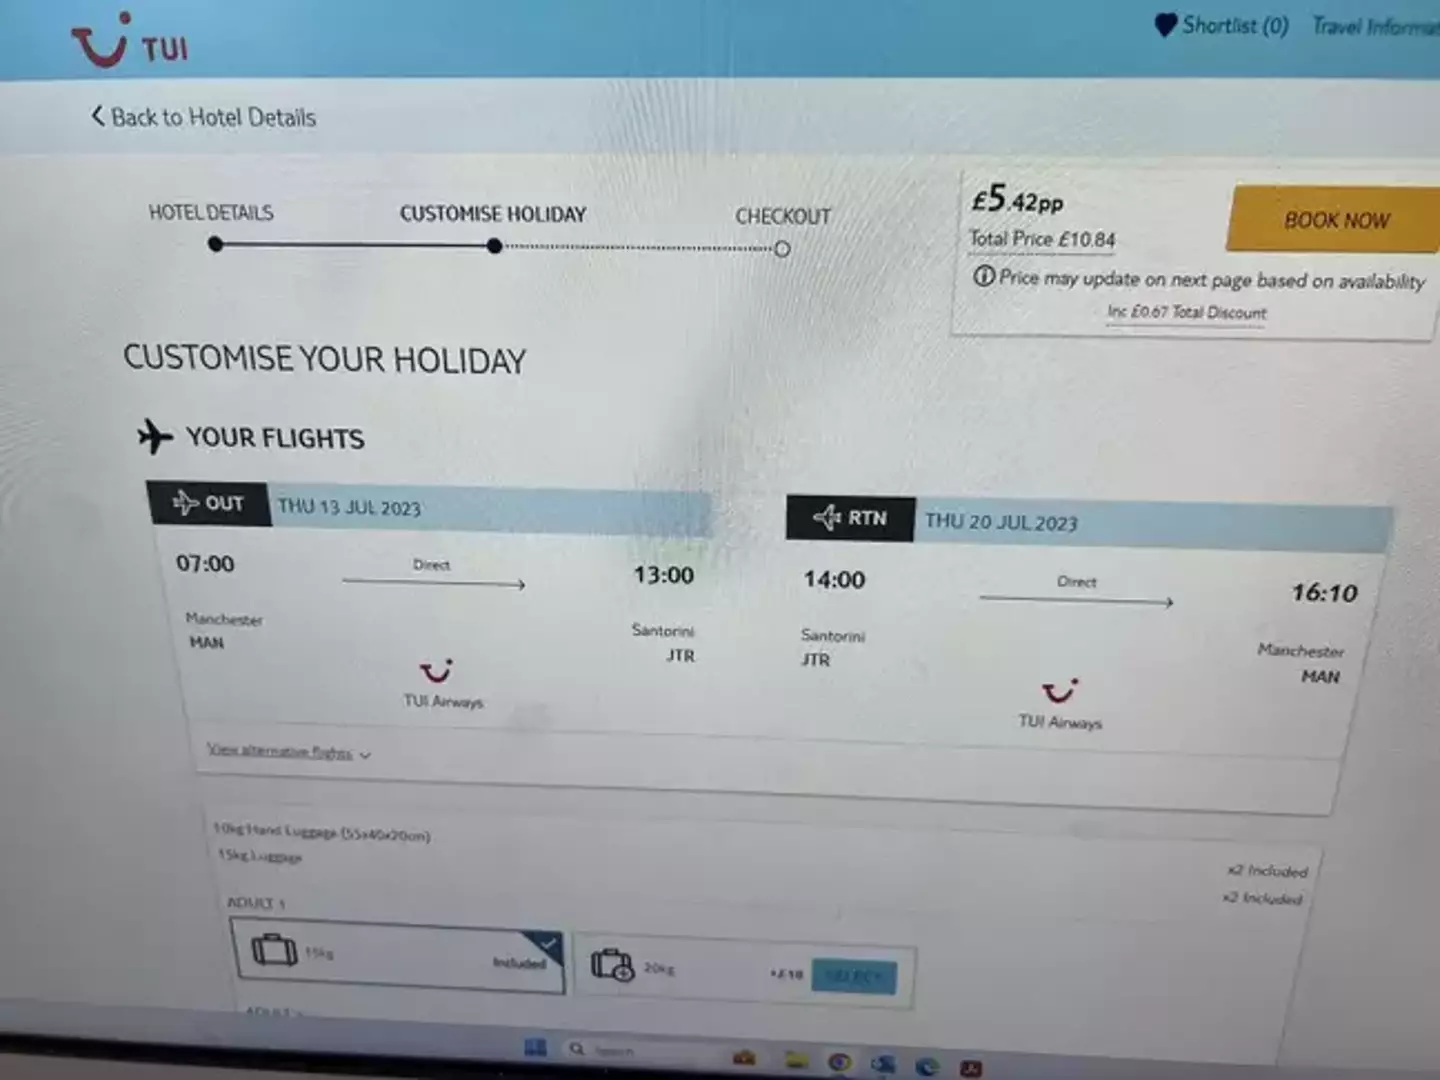 The TUI holiday was advertised on Wednesday (12 July) at just £5.42 per person.